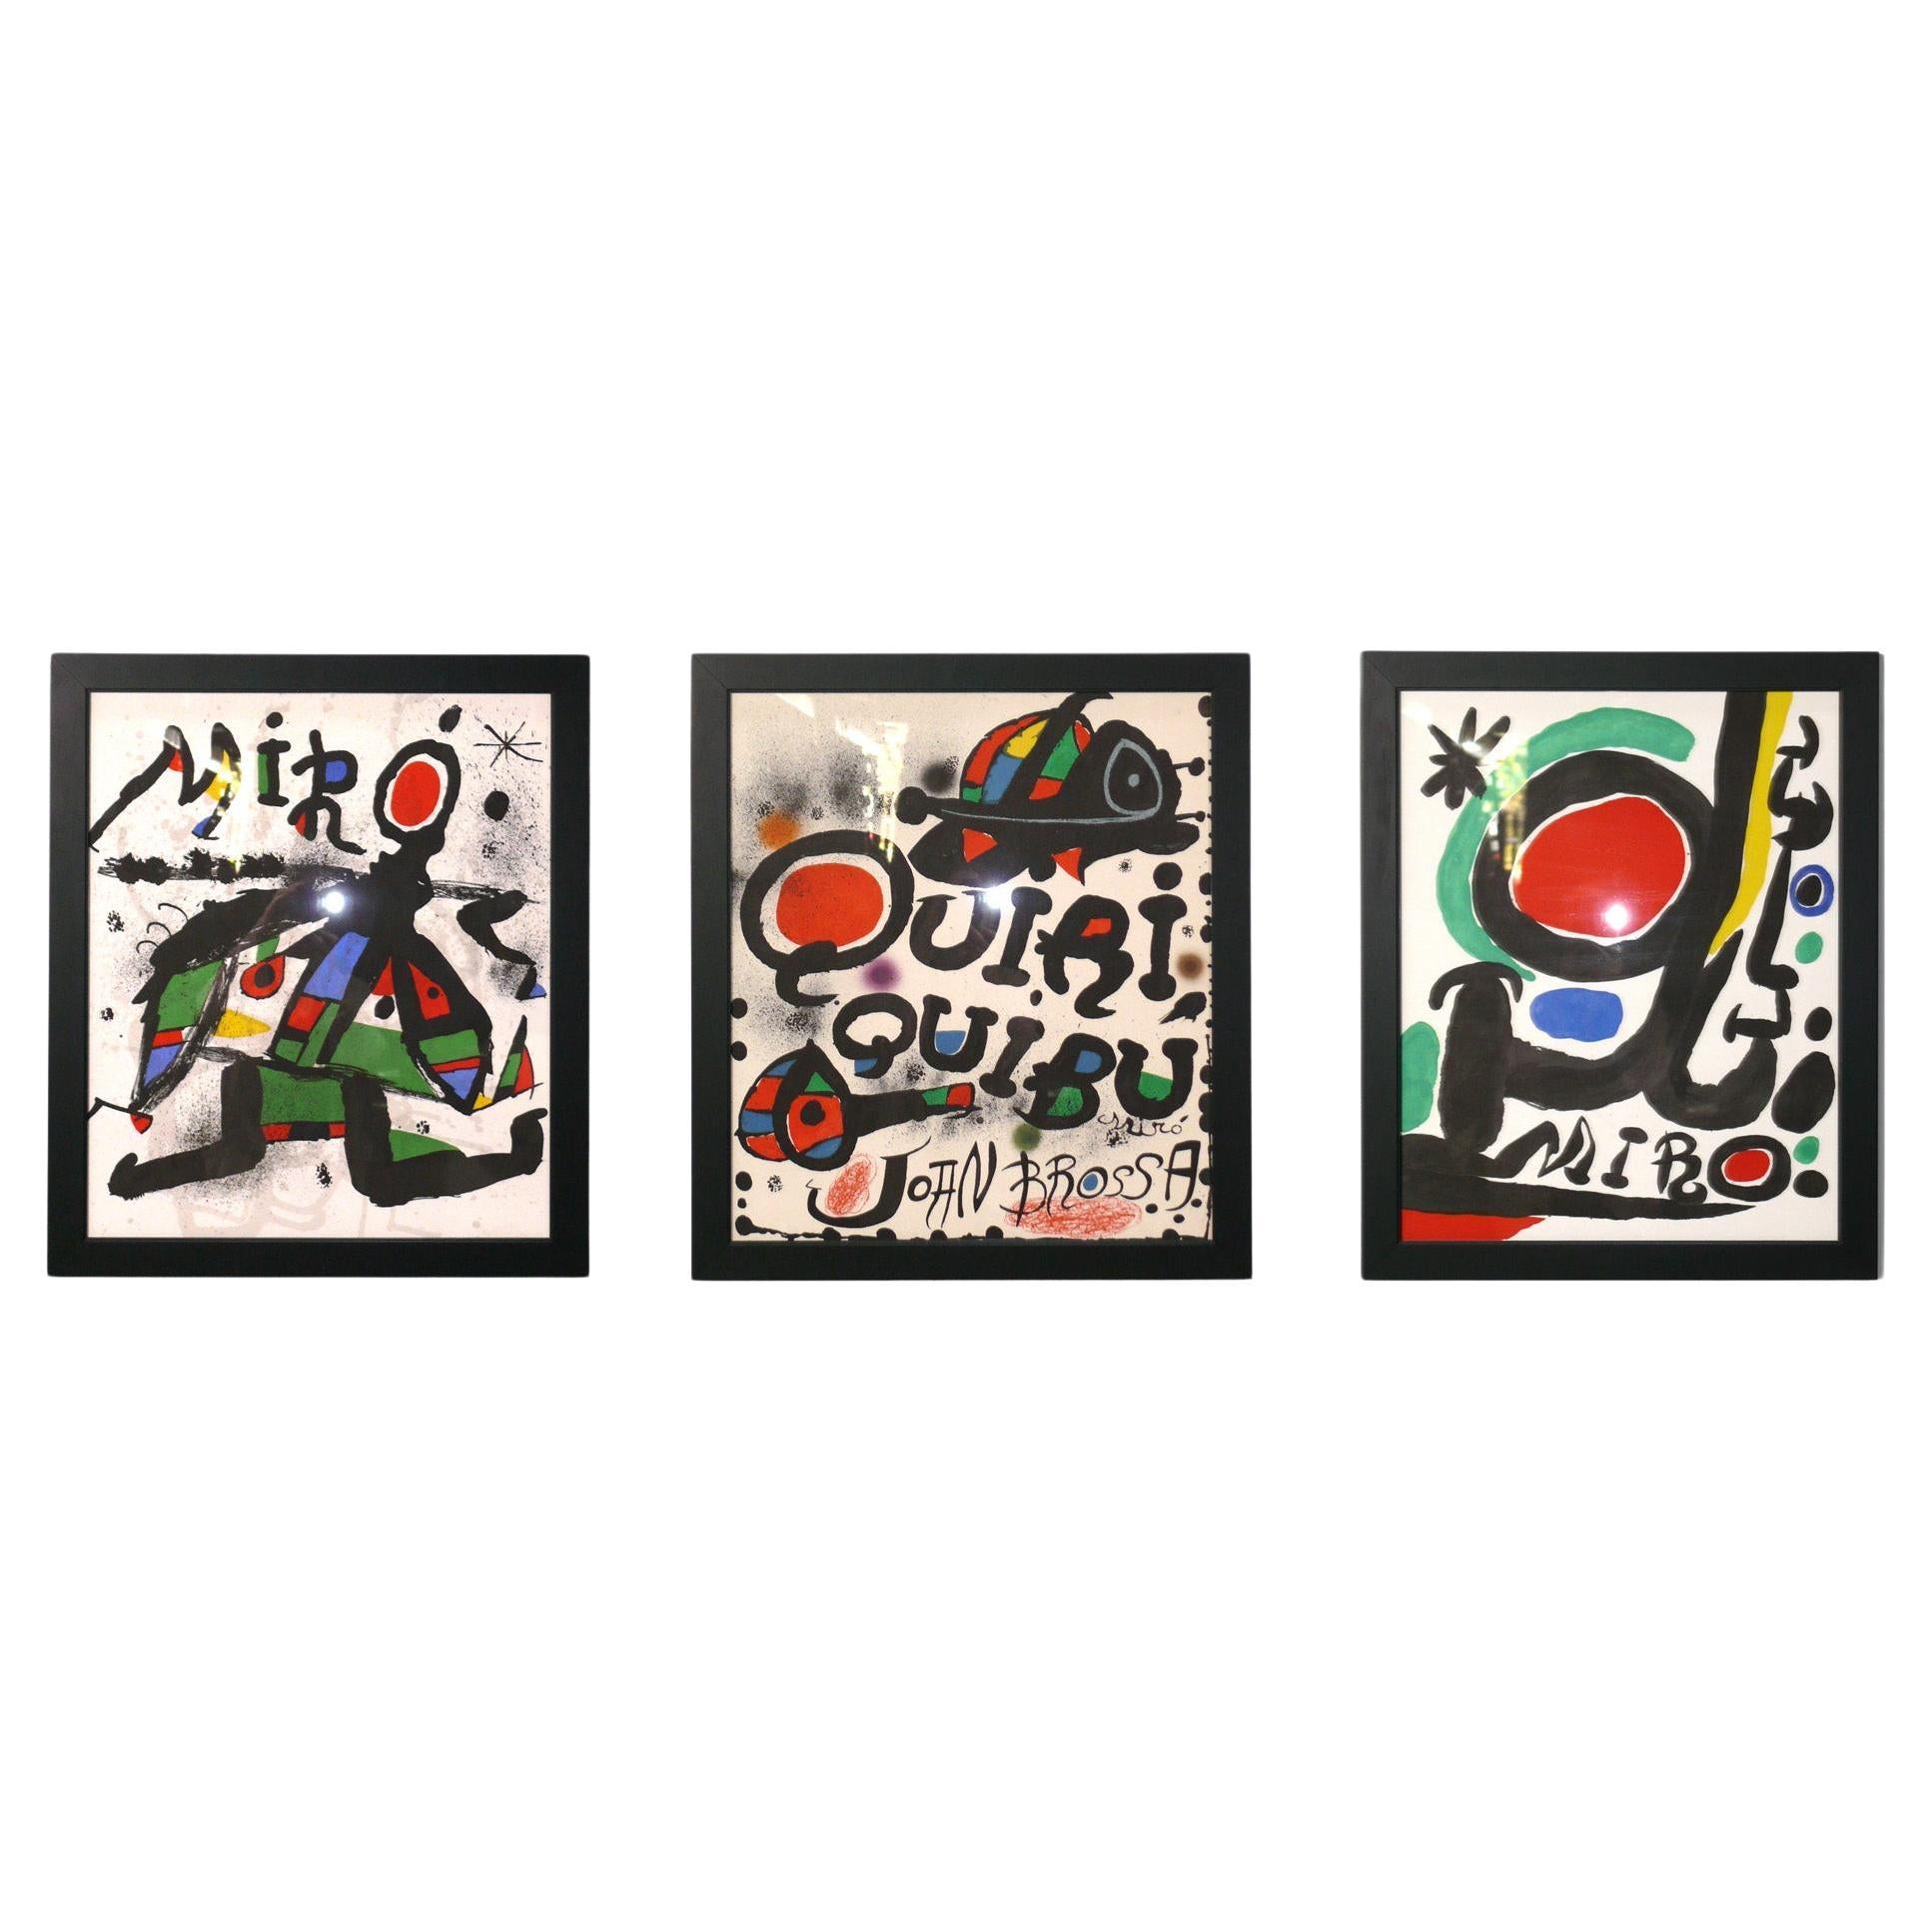 Large Scale Joan Miro Screenprints in Vibrant Colors For Sale